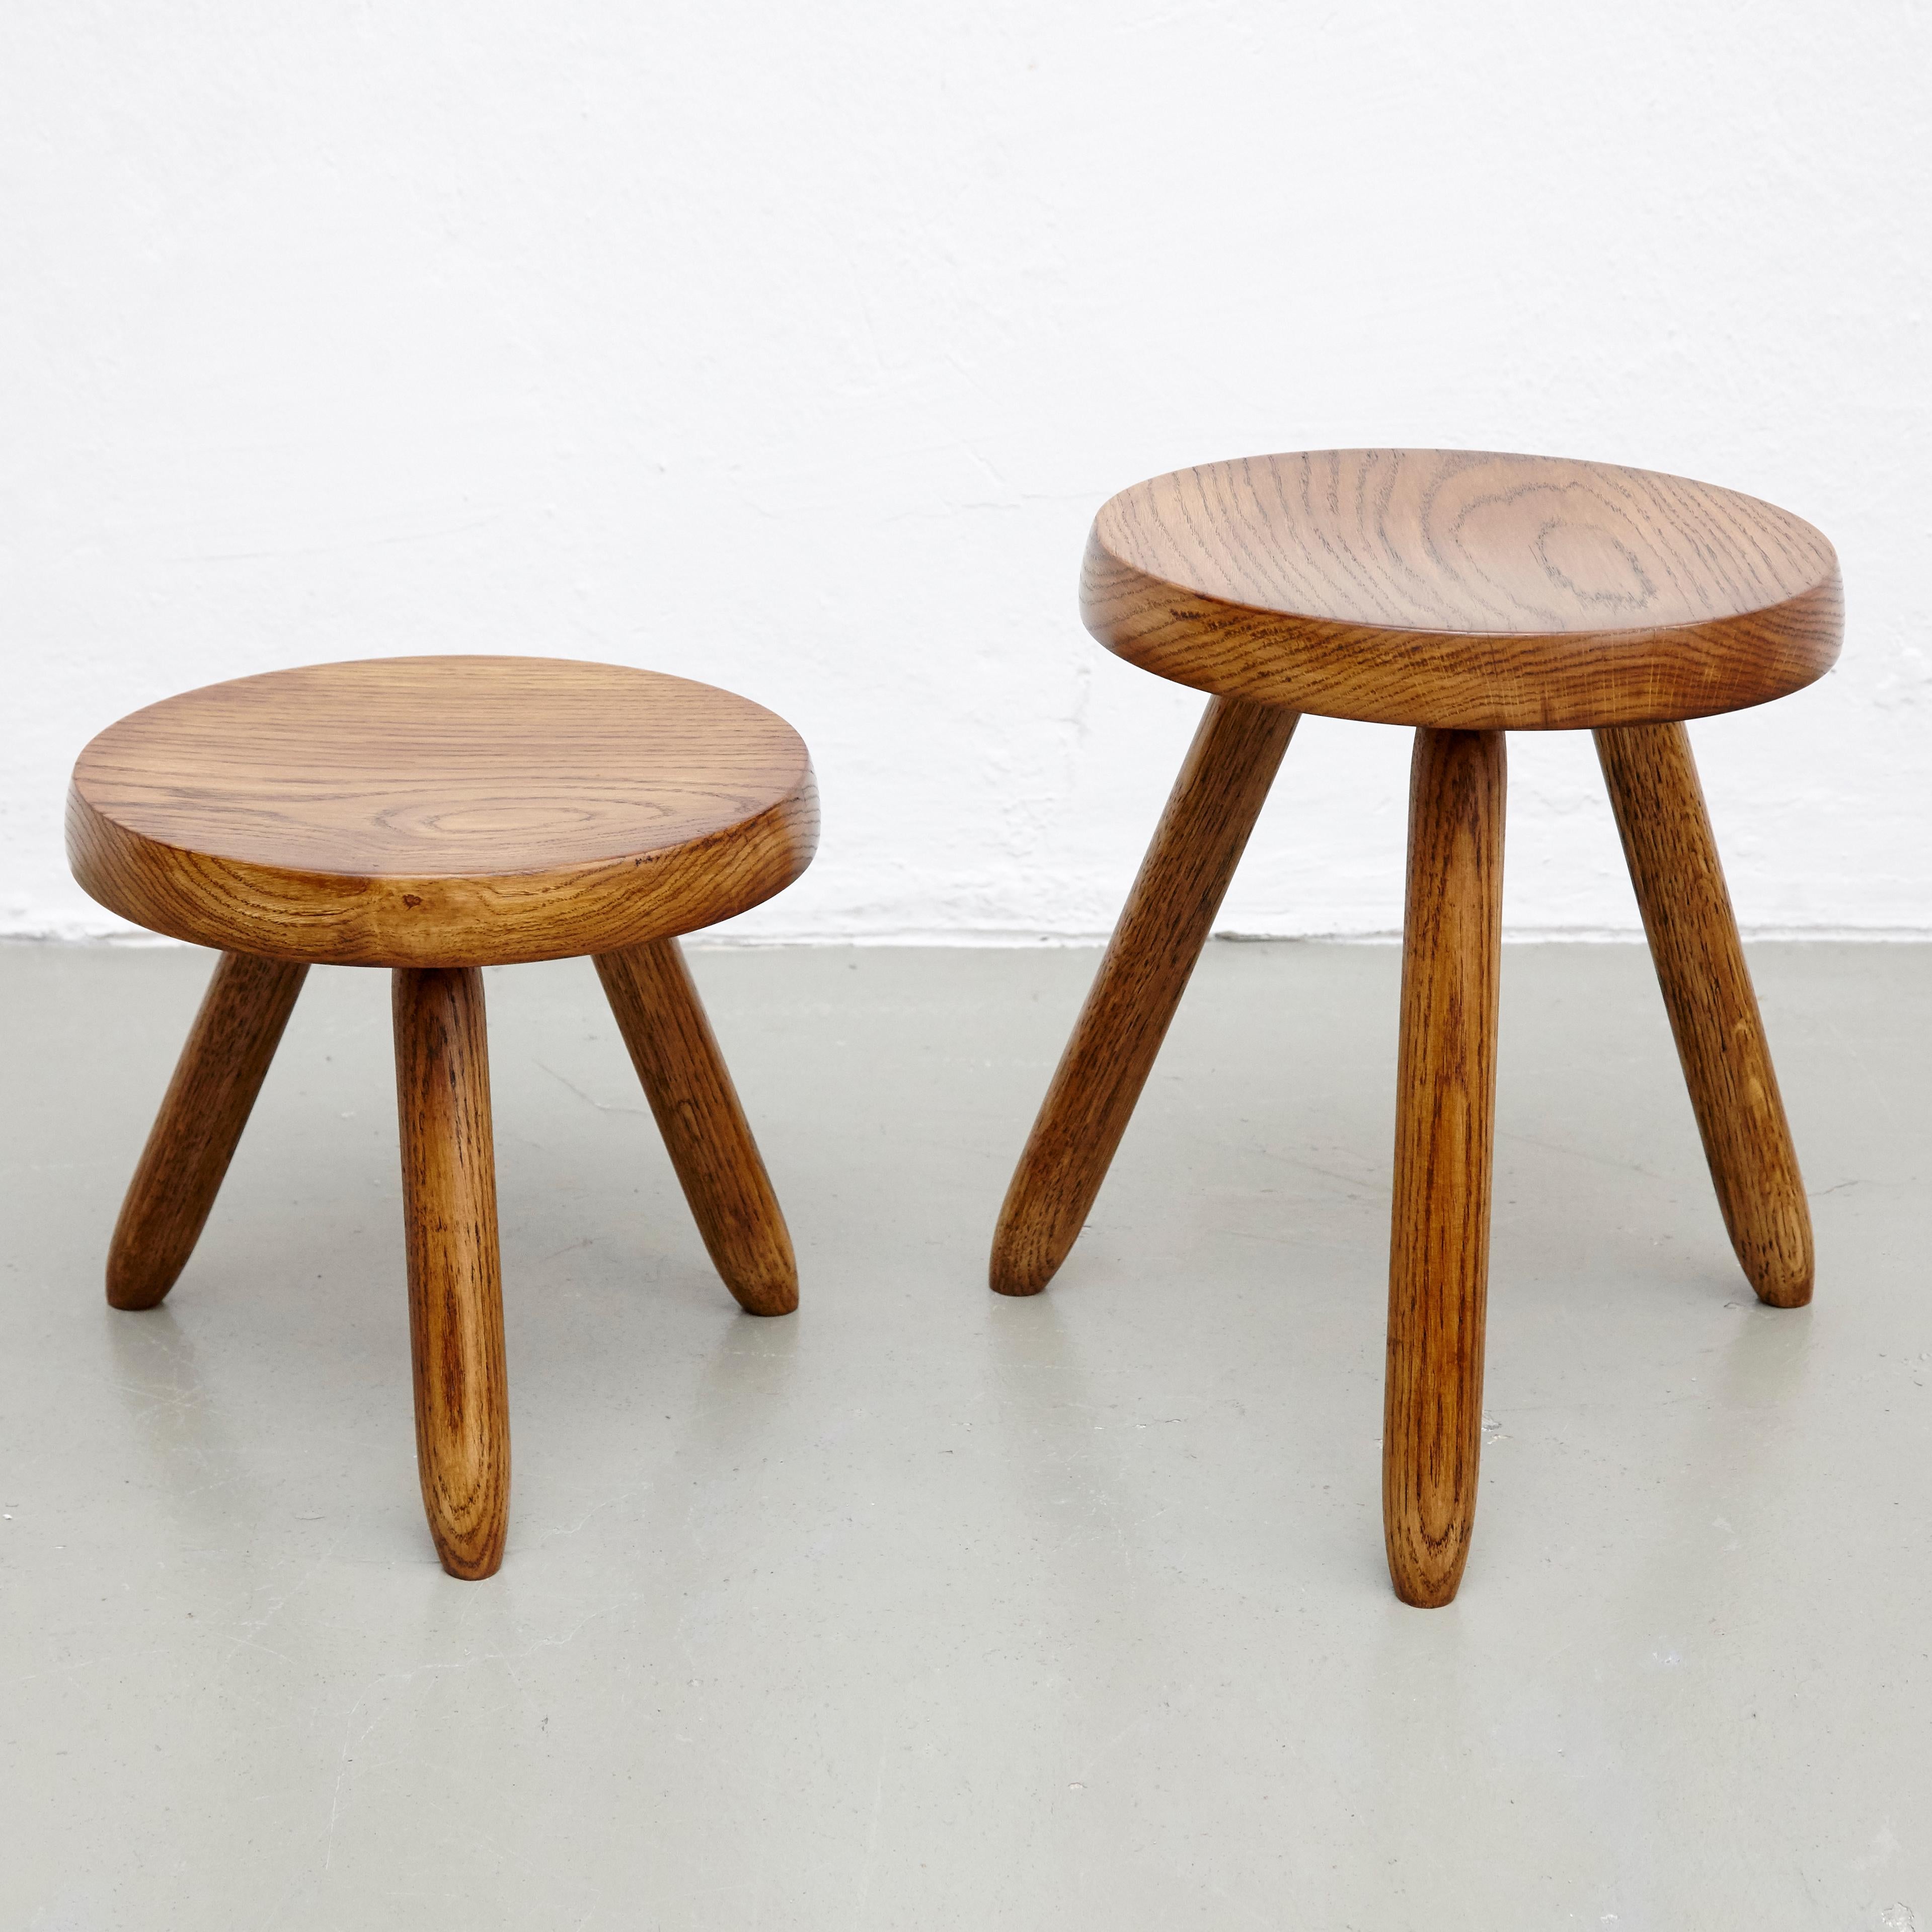 Stools designed in the style of Charlotte Perriand.
Made by unknown manufacturer.

30 x 40 cm
31 x 30 cm

In good original condition, preserving a beautiful patina, with minor wear consistent with age and use. 

Charlotte Perriand